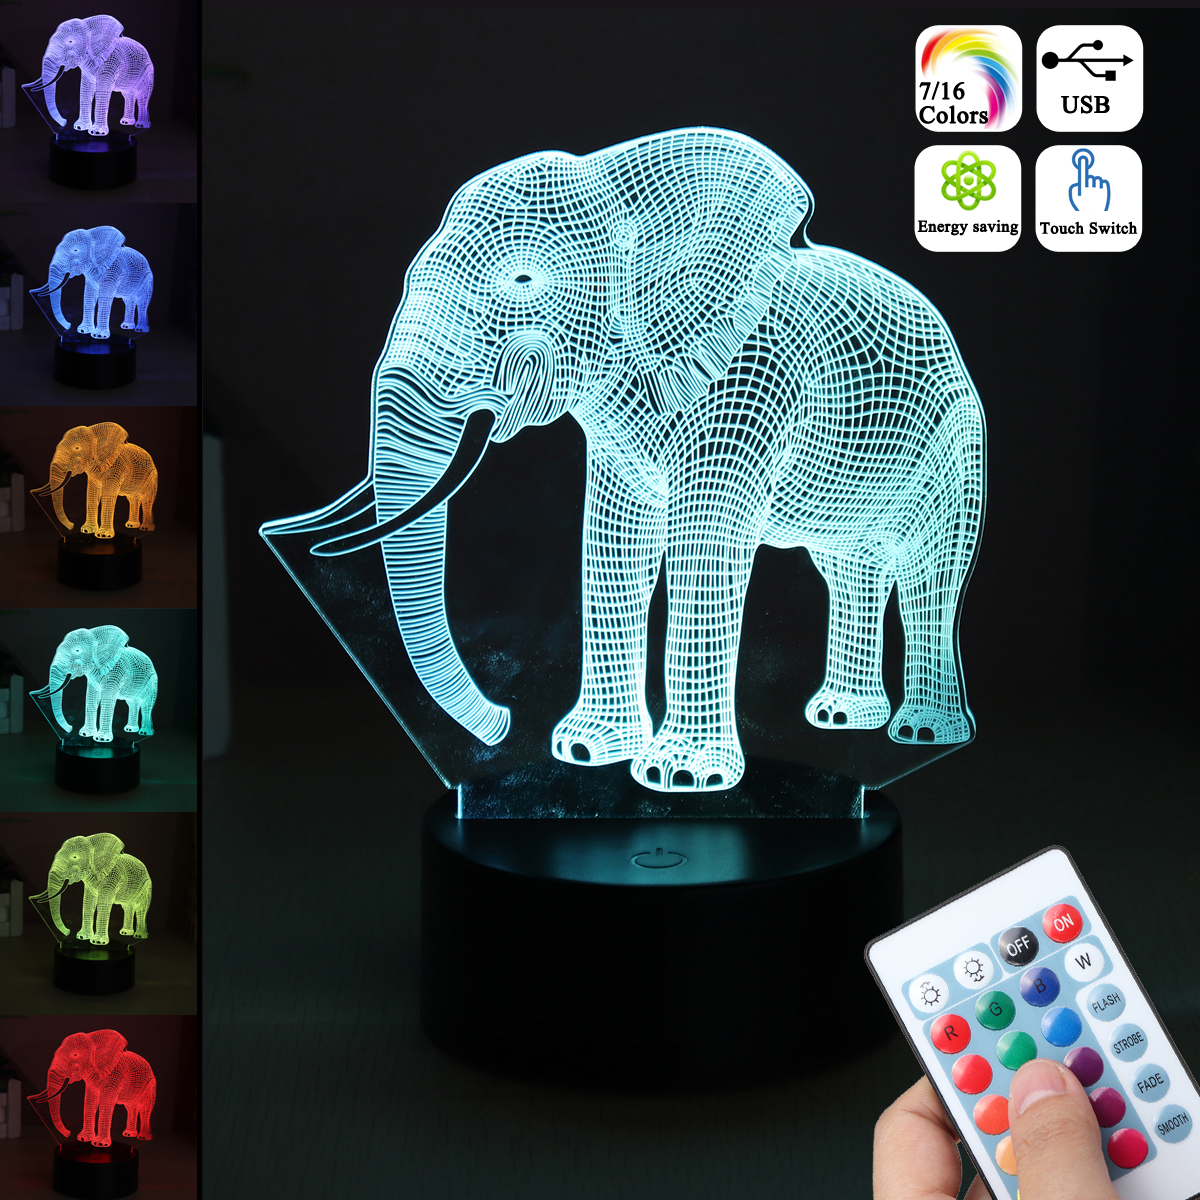 3D-Acrylic-LED-716-Colors-Colorful-Night-Lights-Elephant-Model-Remote-Control-Touch-Switch-Night-Lig-1370467-1